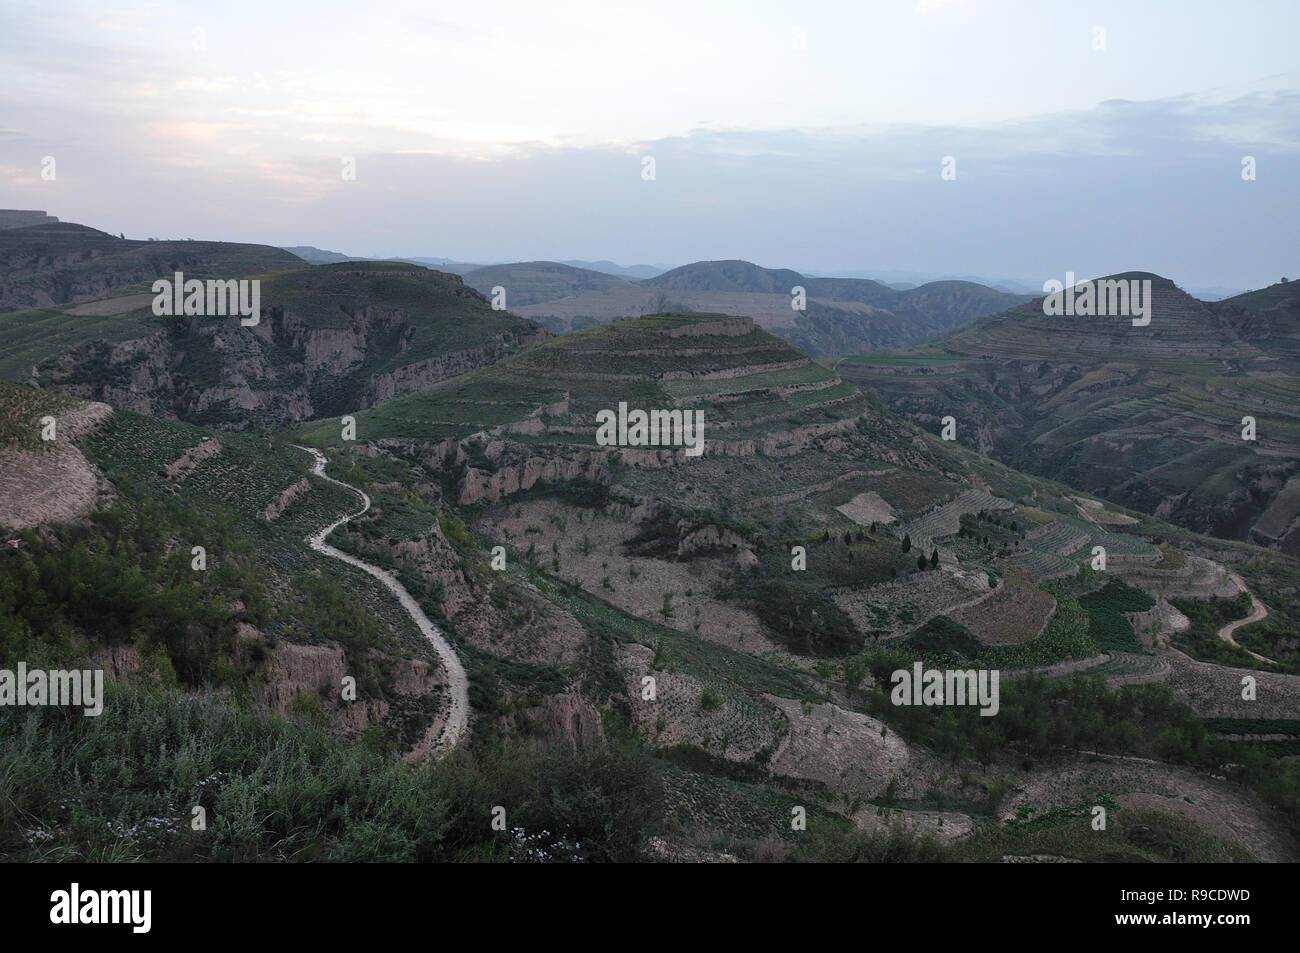 Terraced fields on the hillside in China, Shanxi Province Stock Photo